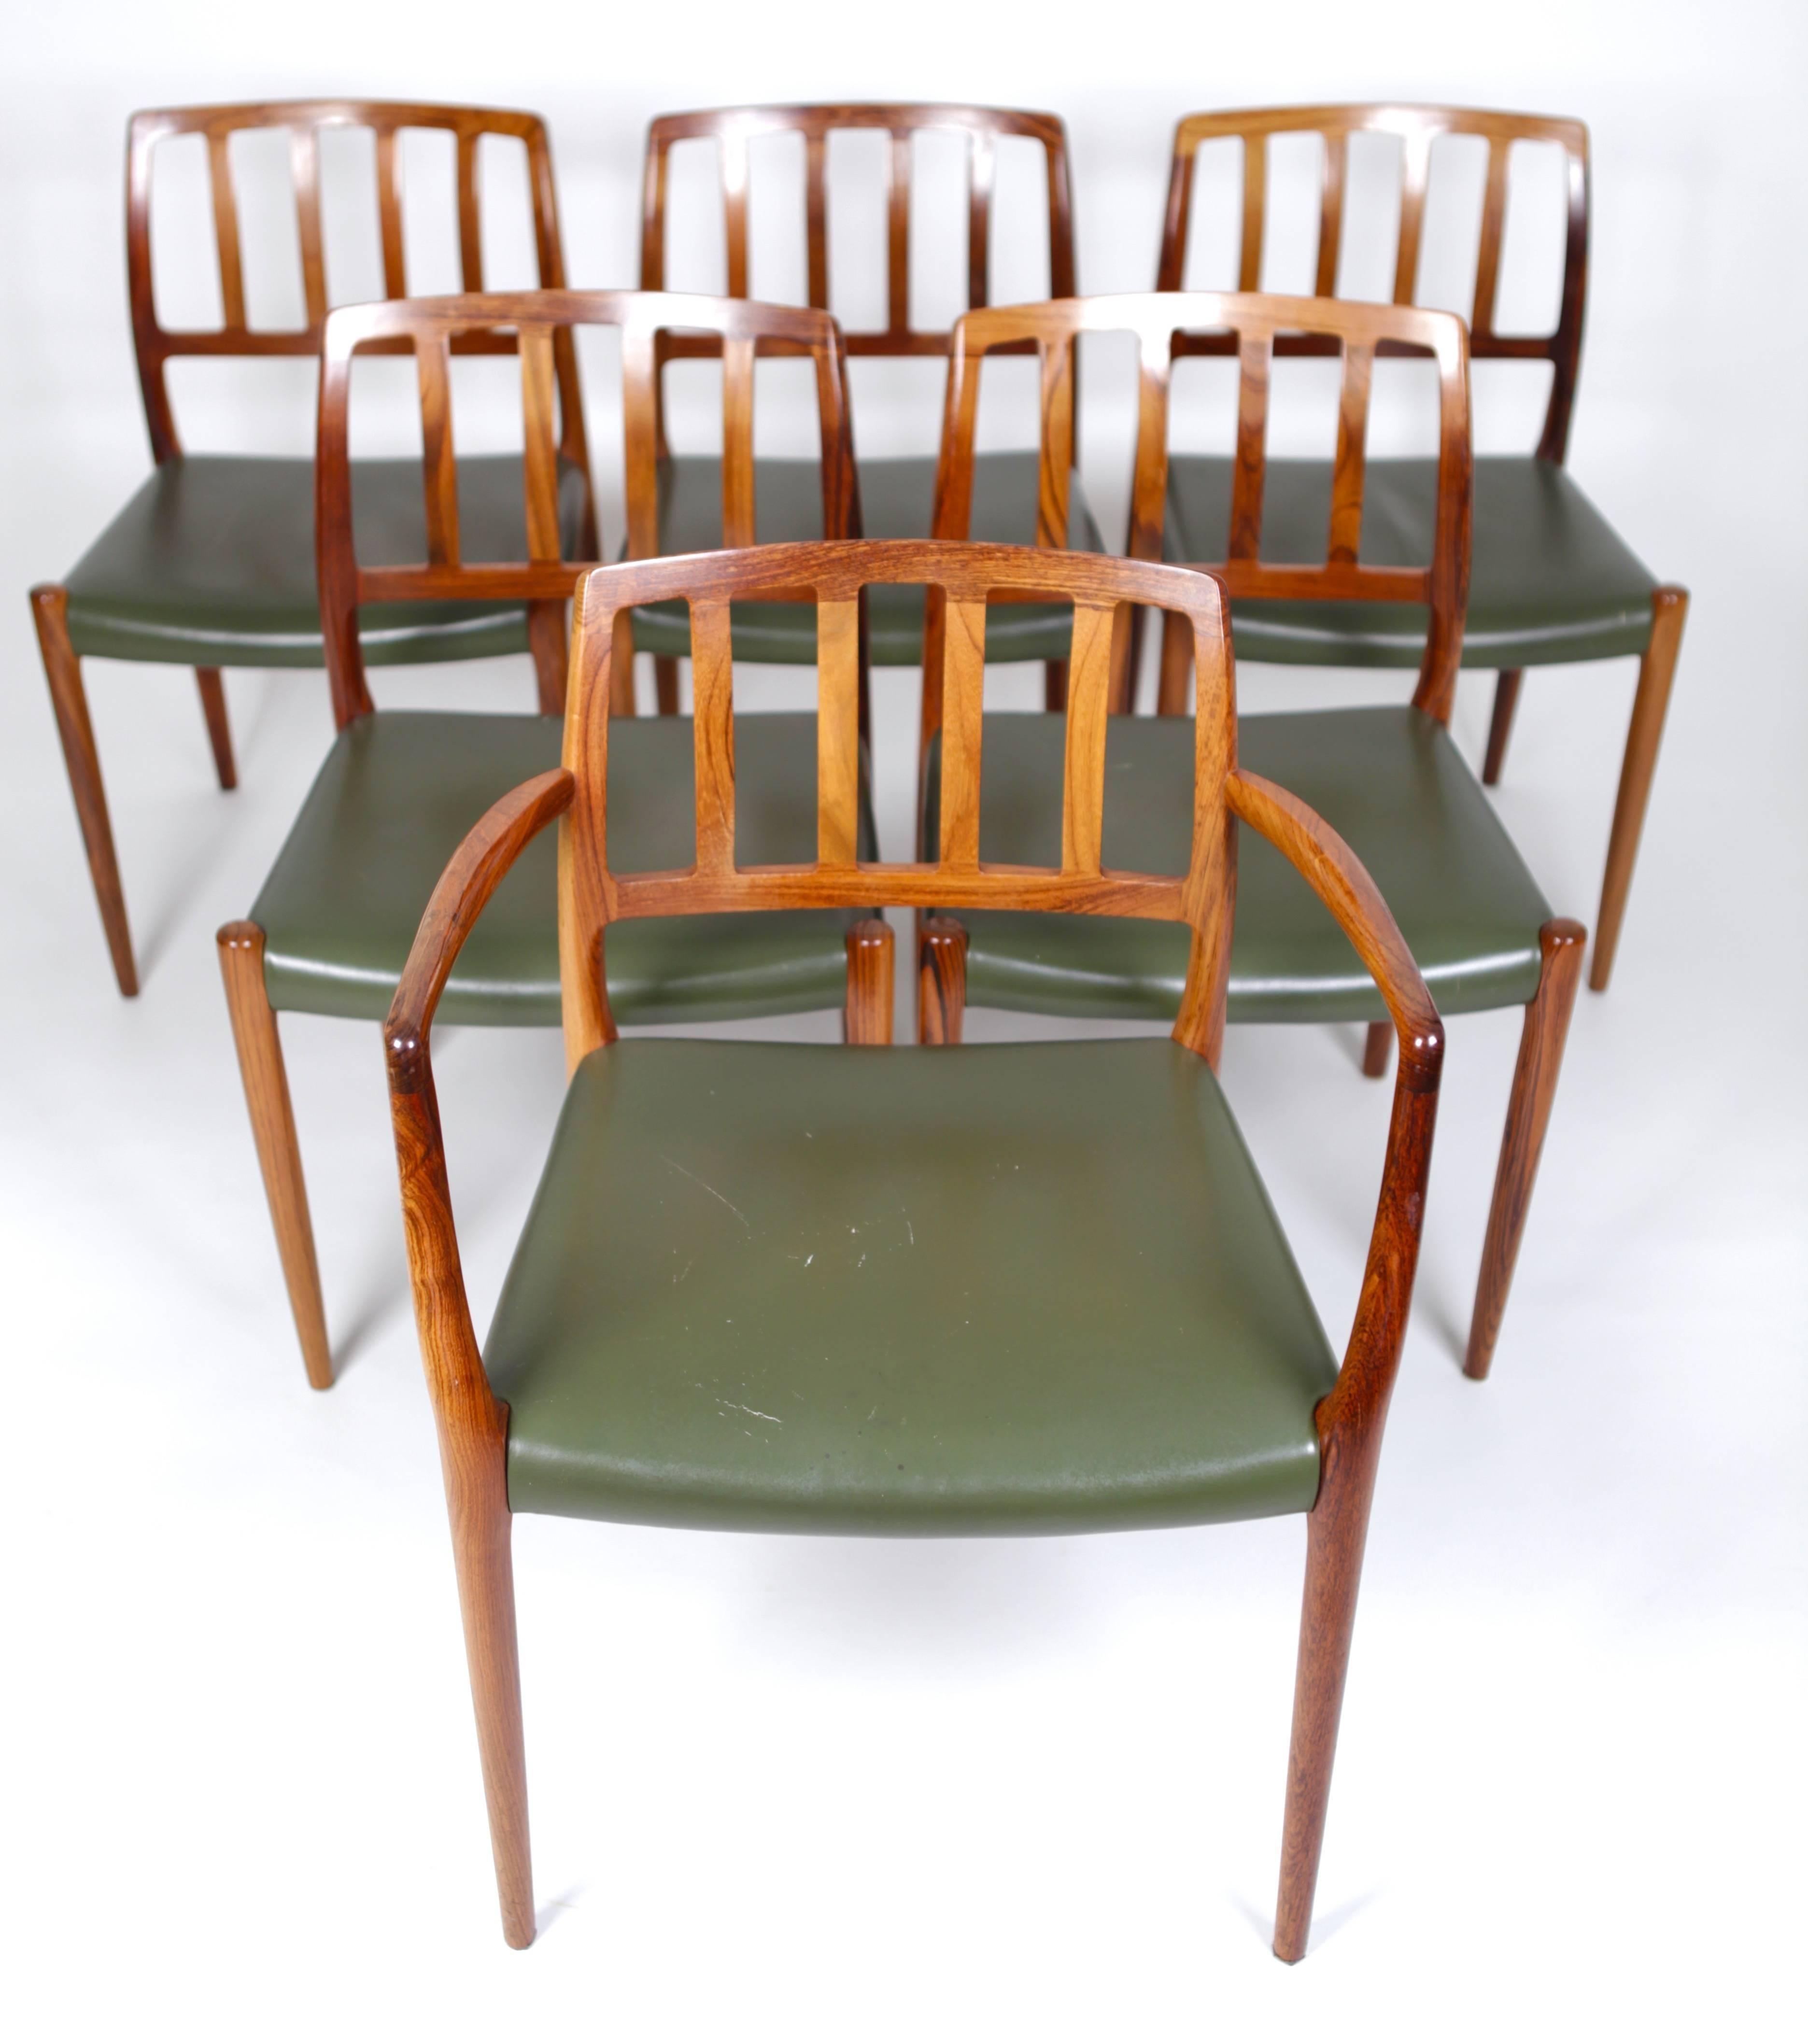 Set of six dining chairs ( Model 66 and 83) in East Indian rosewood and green leather, designed by Niels O. Møller in 1974,
Manufactured by P. Jeppesen.
        